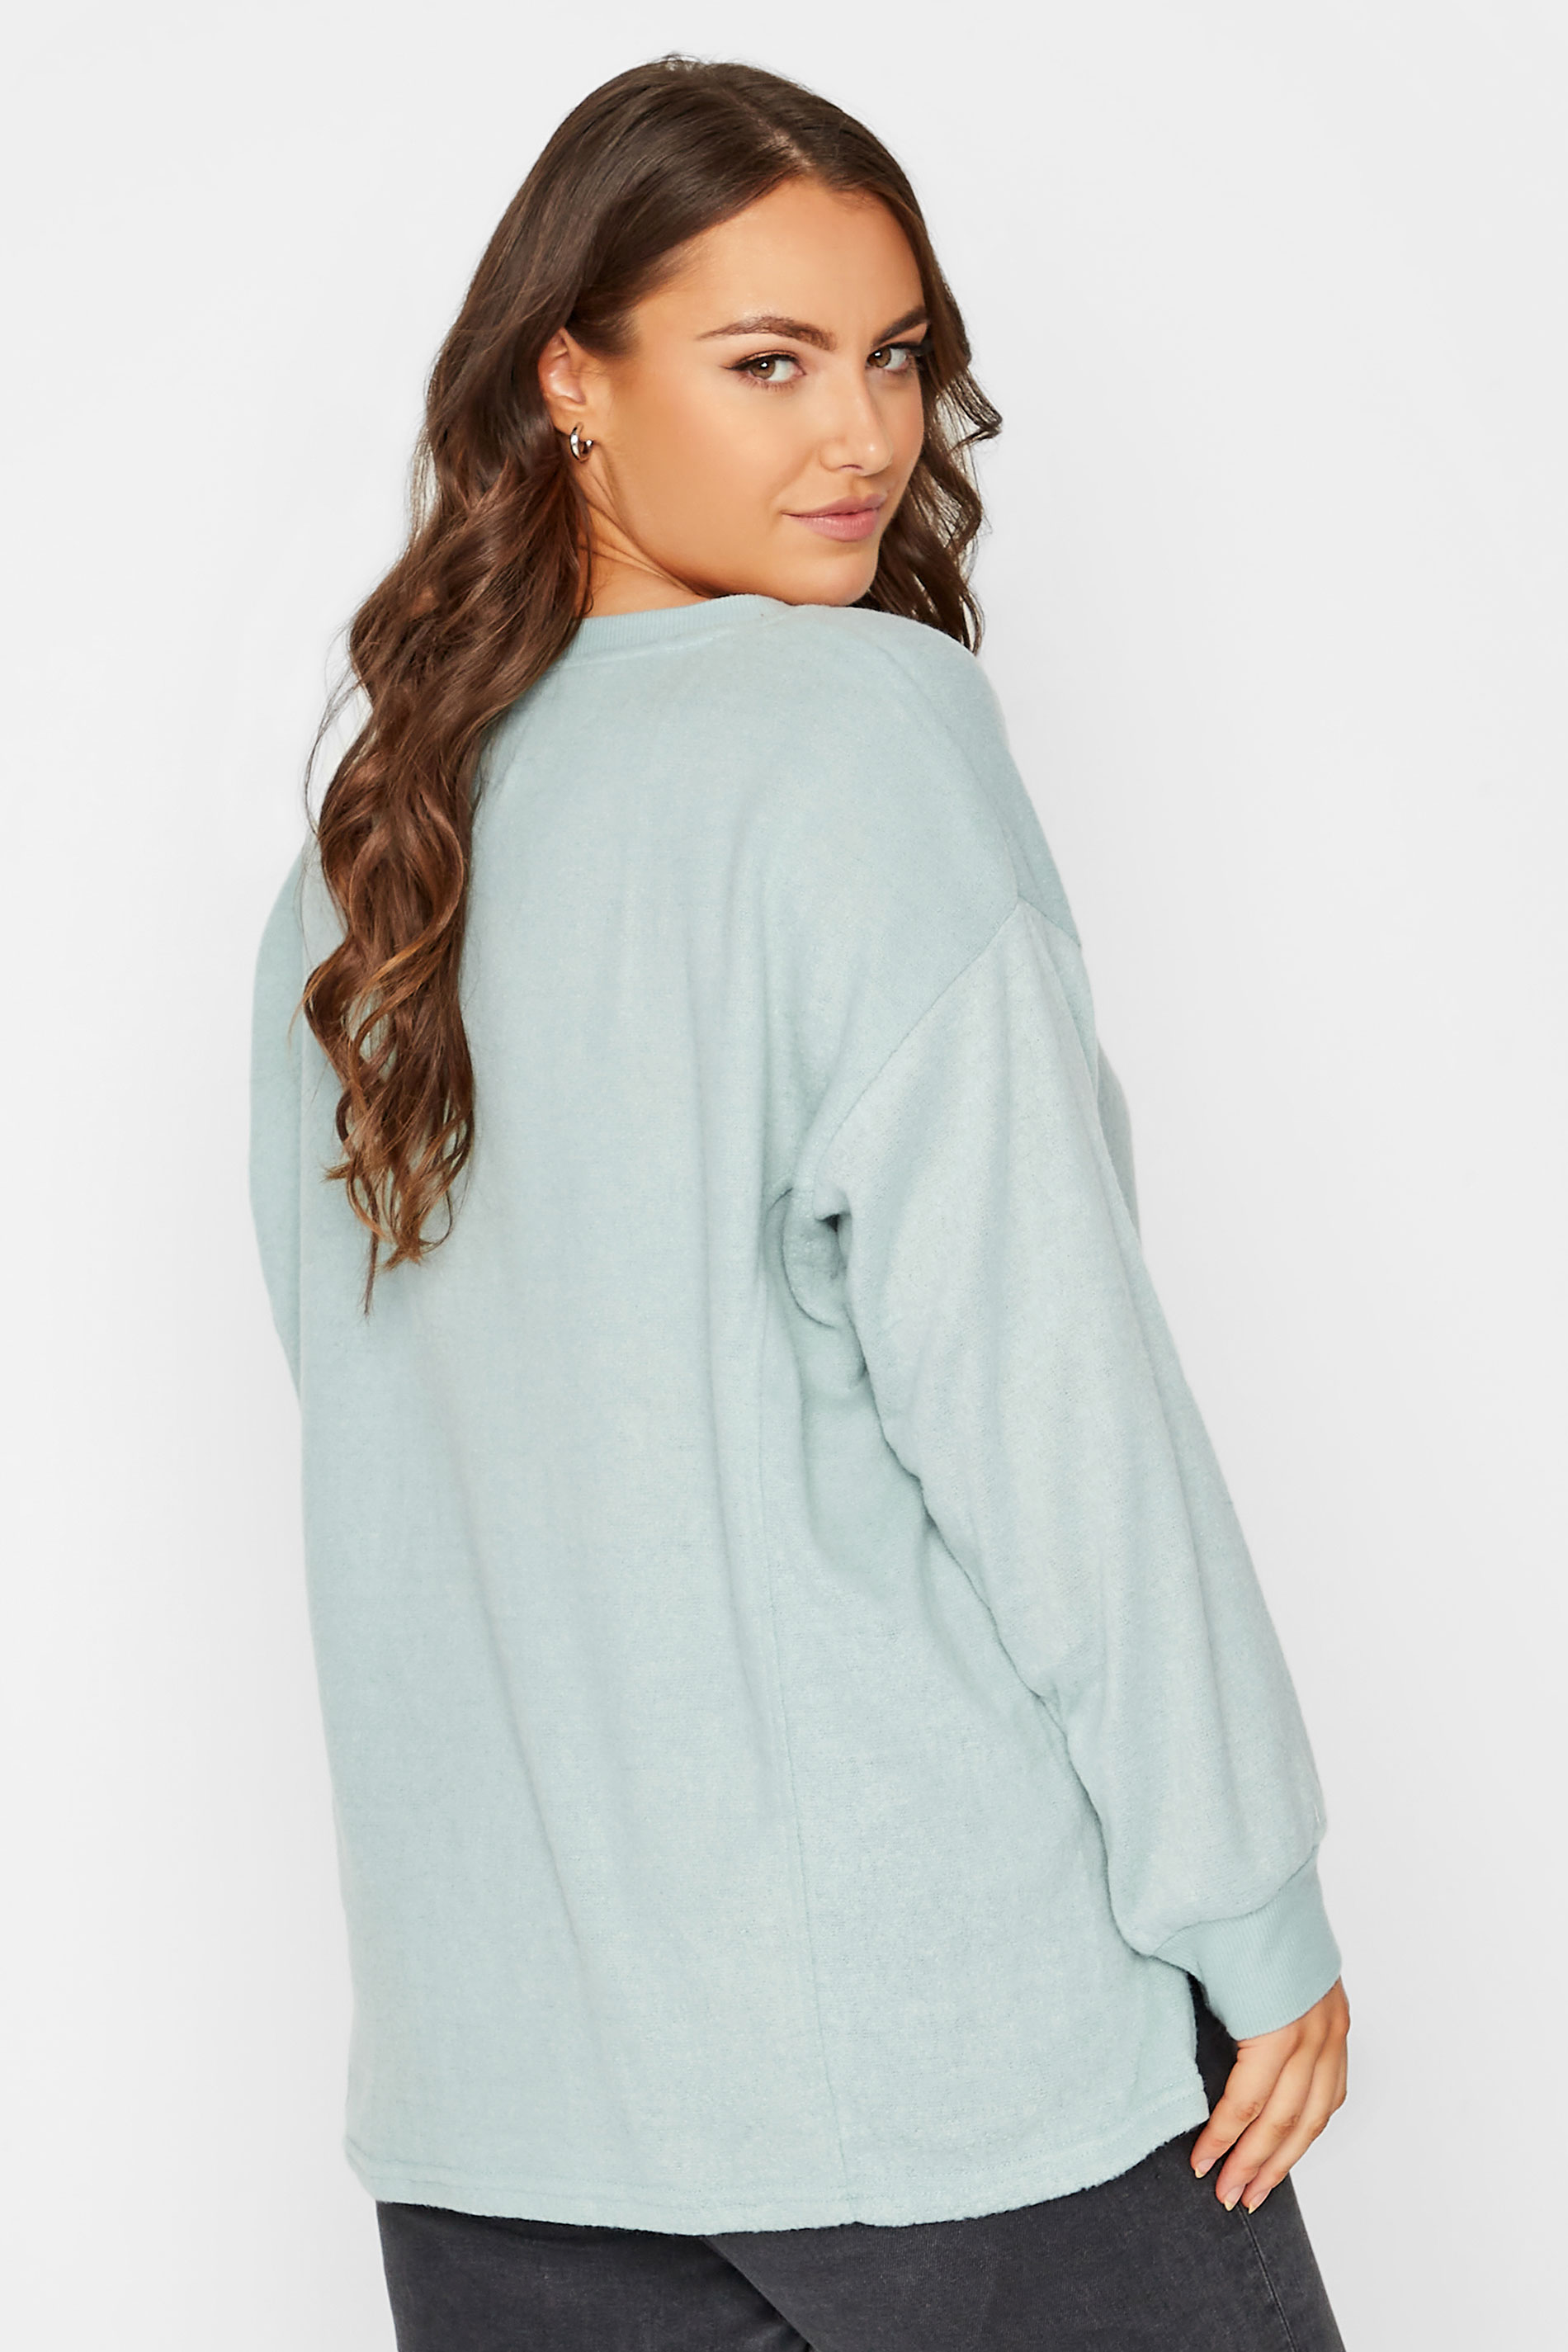 Plus Size Mint Green V-Neck Soft Touch Fleece Sweatshirt | Yours Clothing 3